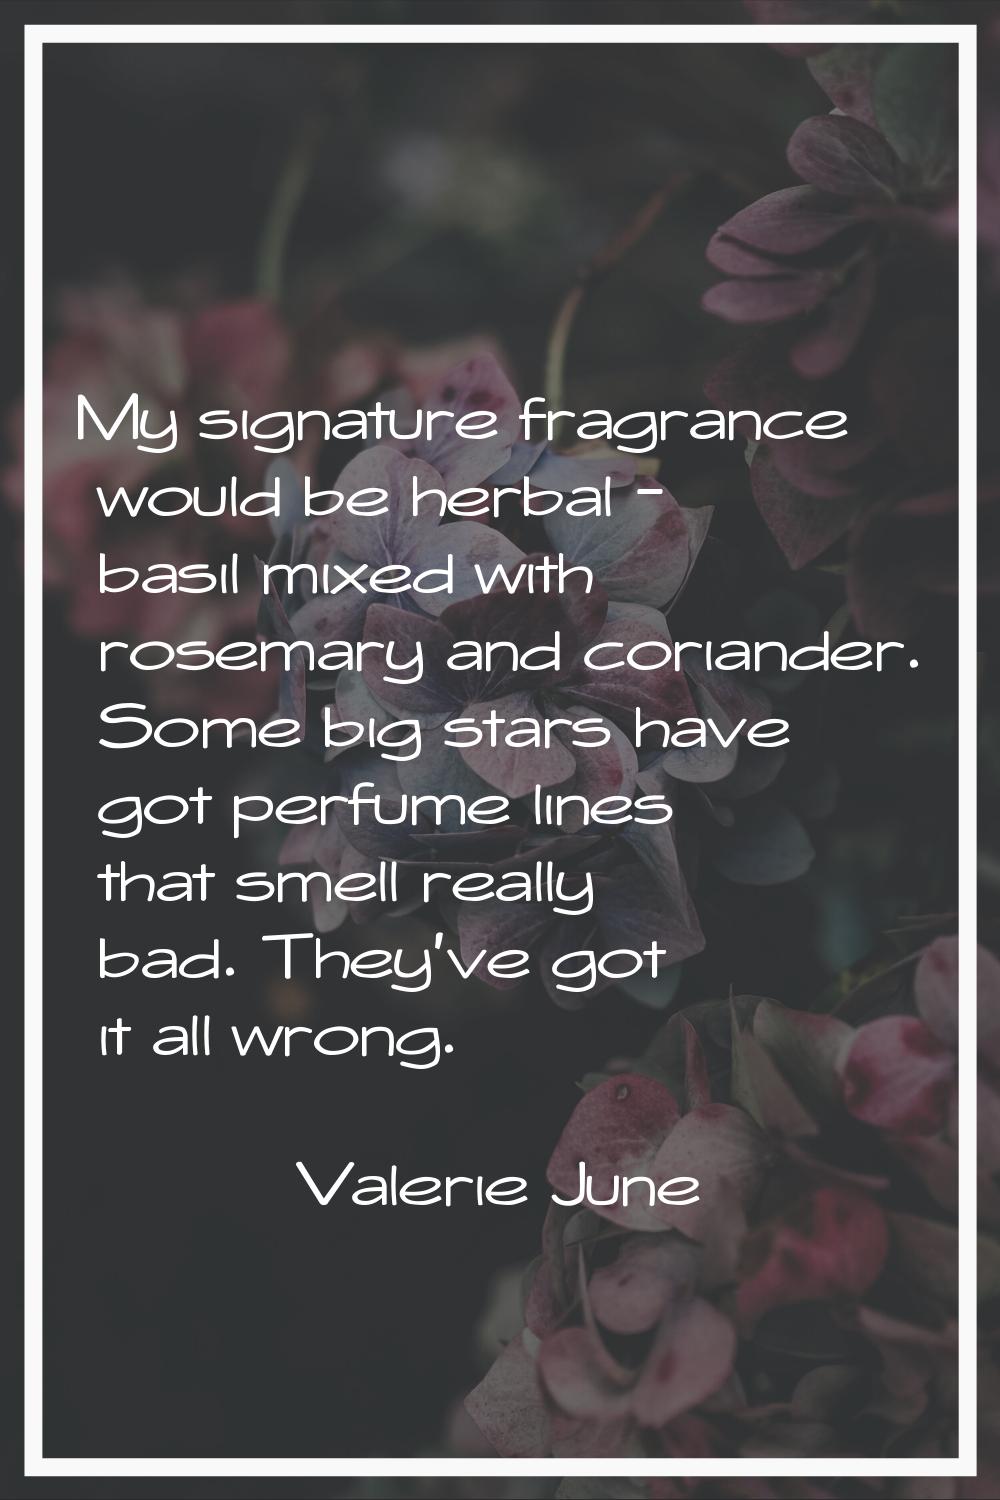 My signature fragrance would be herbal - basil mixed with rosemary and coriander. Some big stars ha